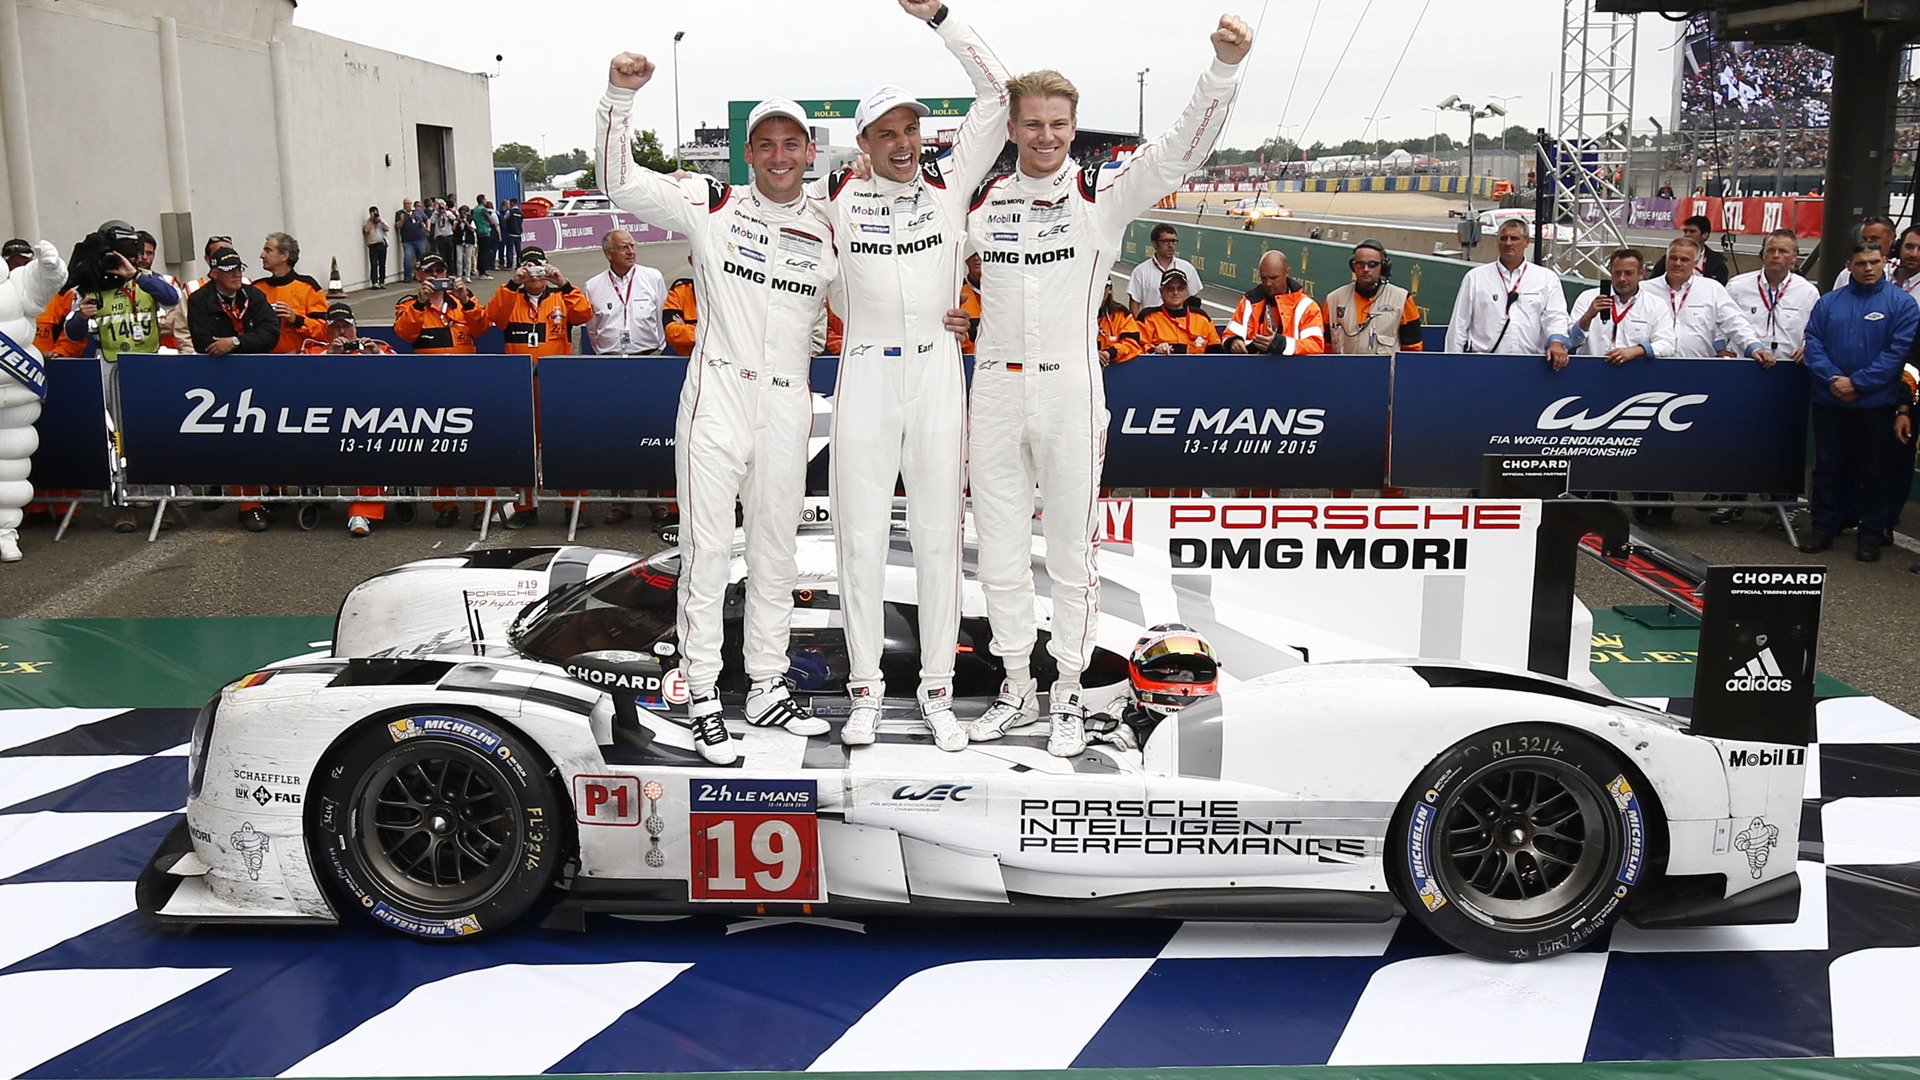 From left to right: Nick Tandy, Earl Bamber & Nico Huelkenberg after 2015 24 Hours of Le Mans win